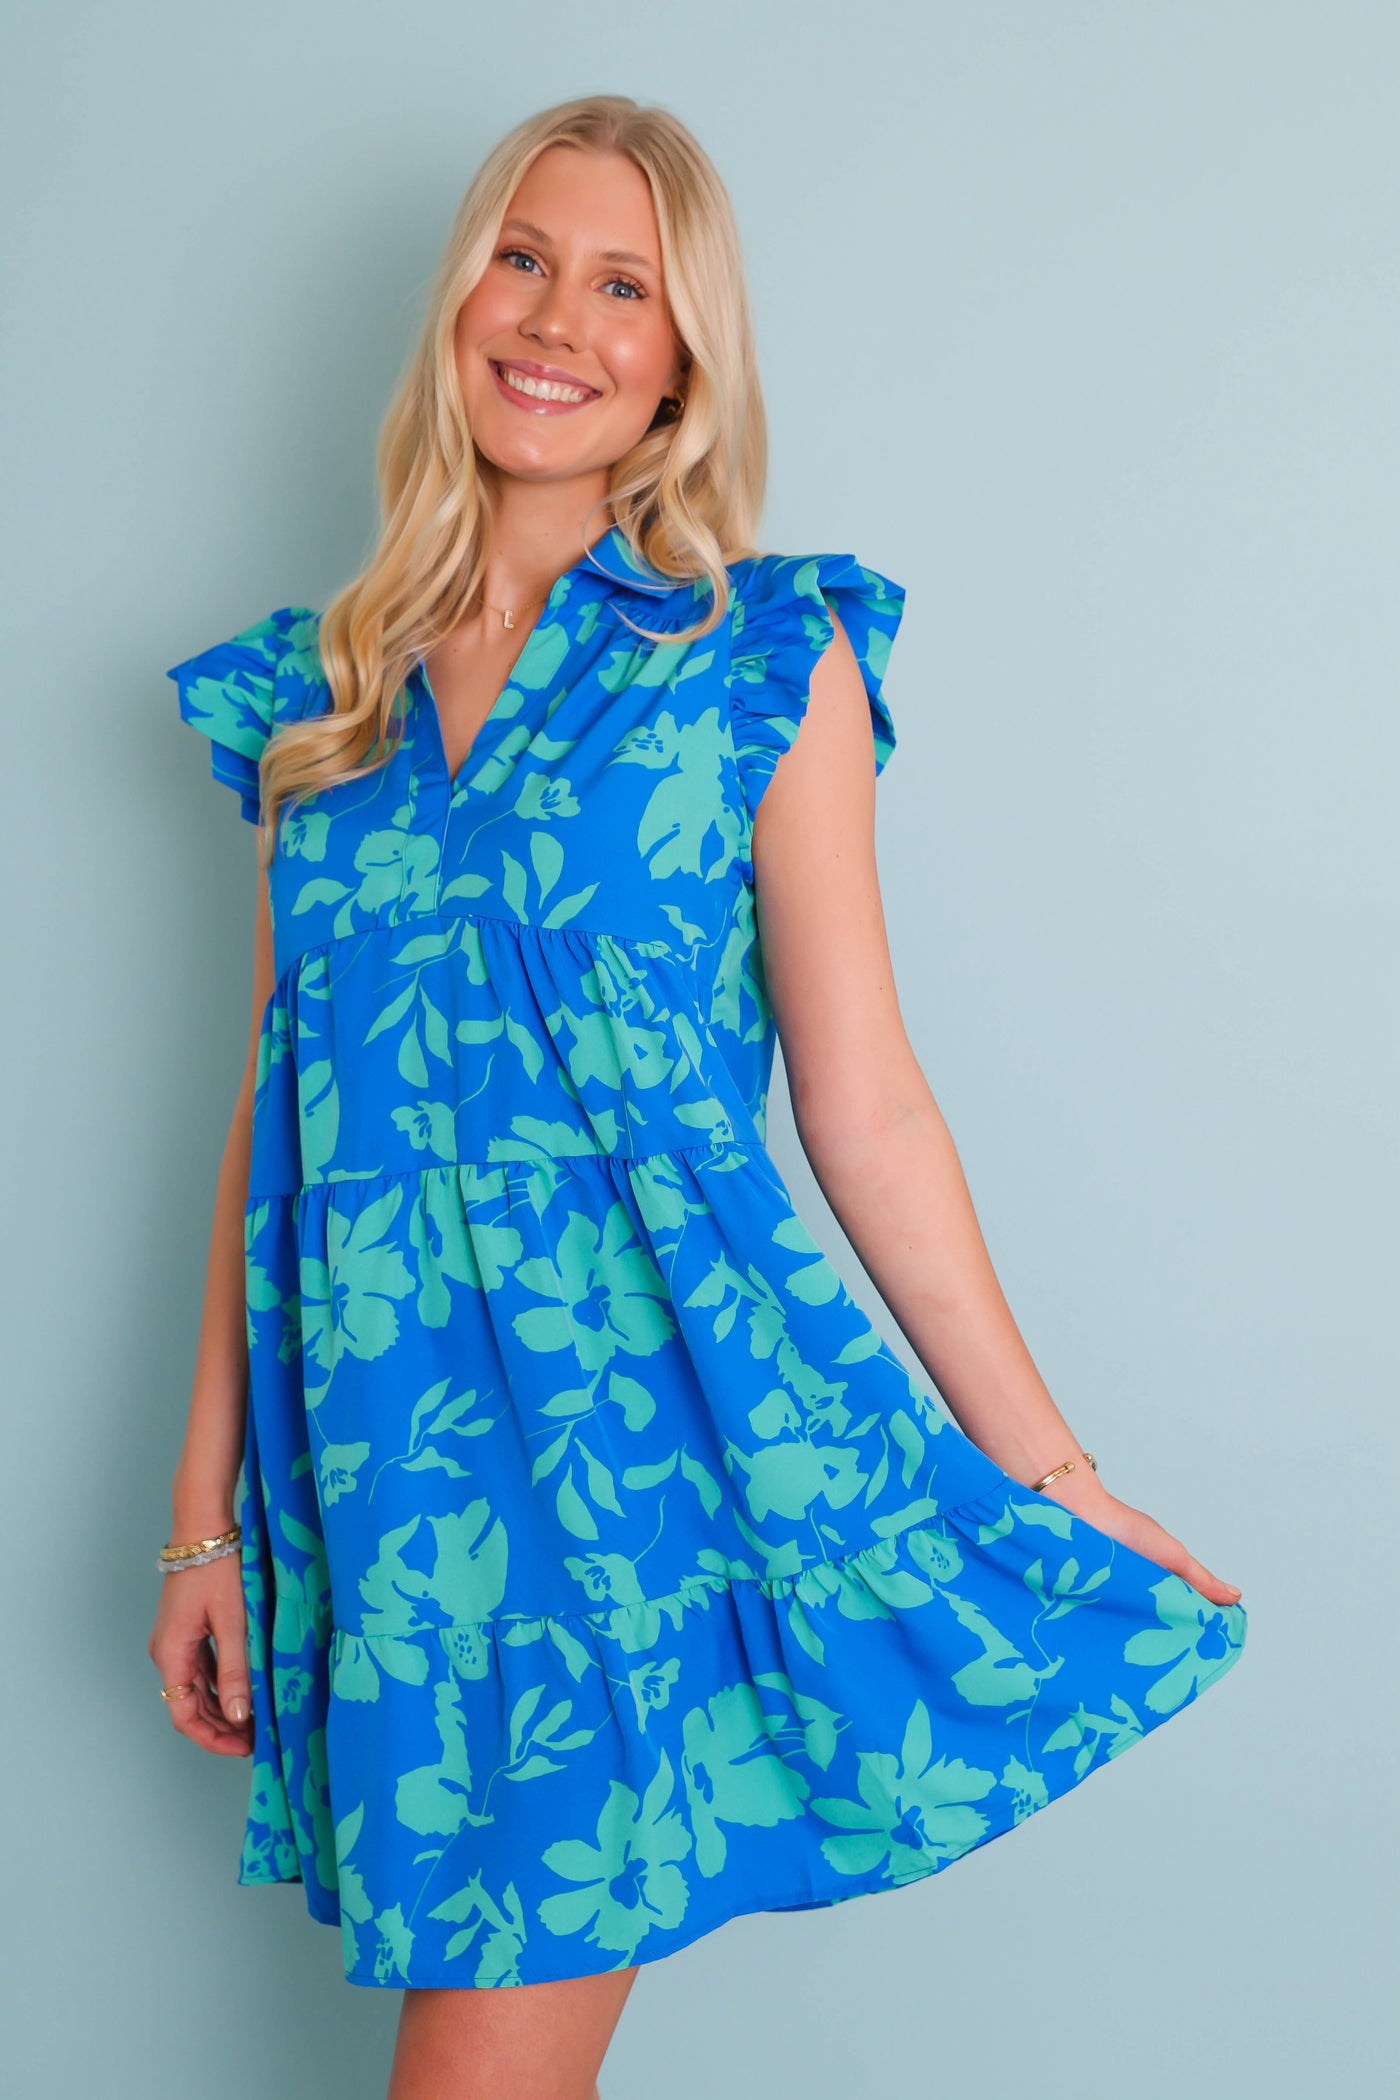 Blue and Green Floral Dress- Women's Vacation Dresses- Umgee Blue Dress